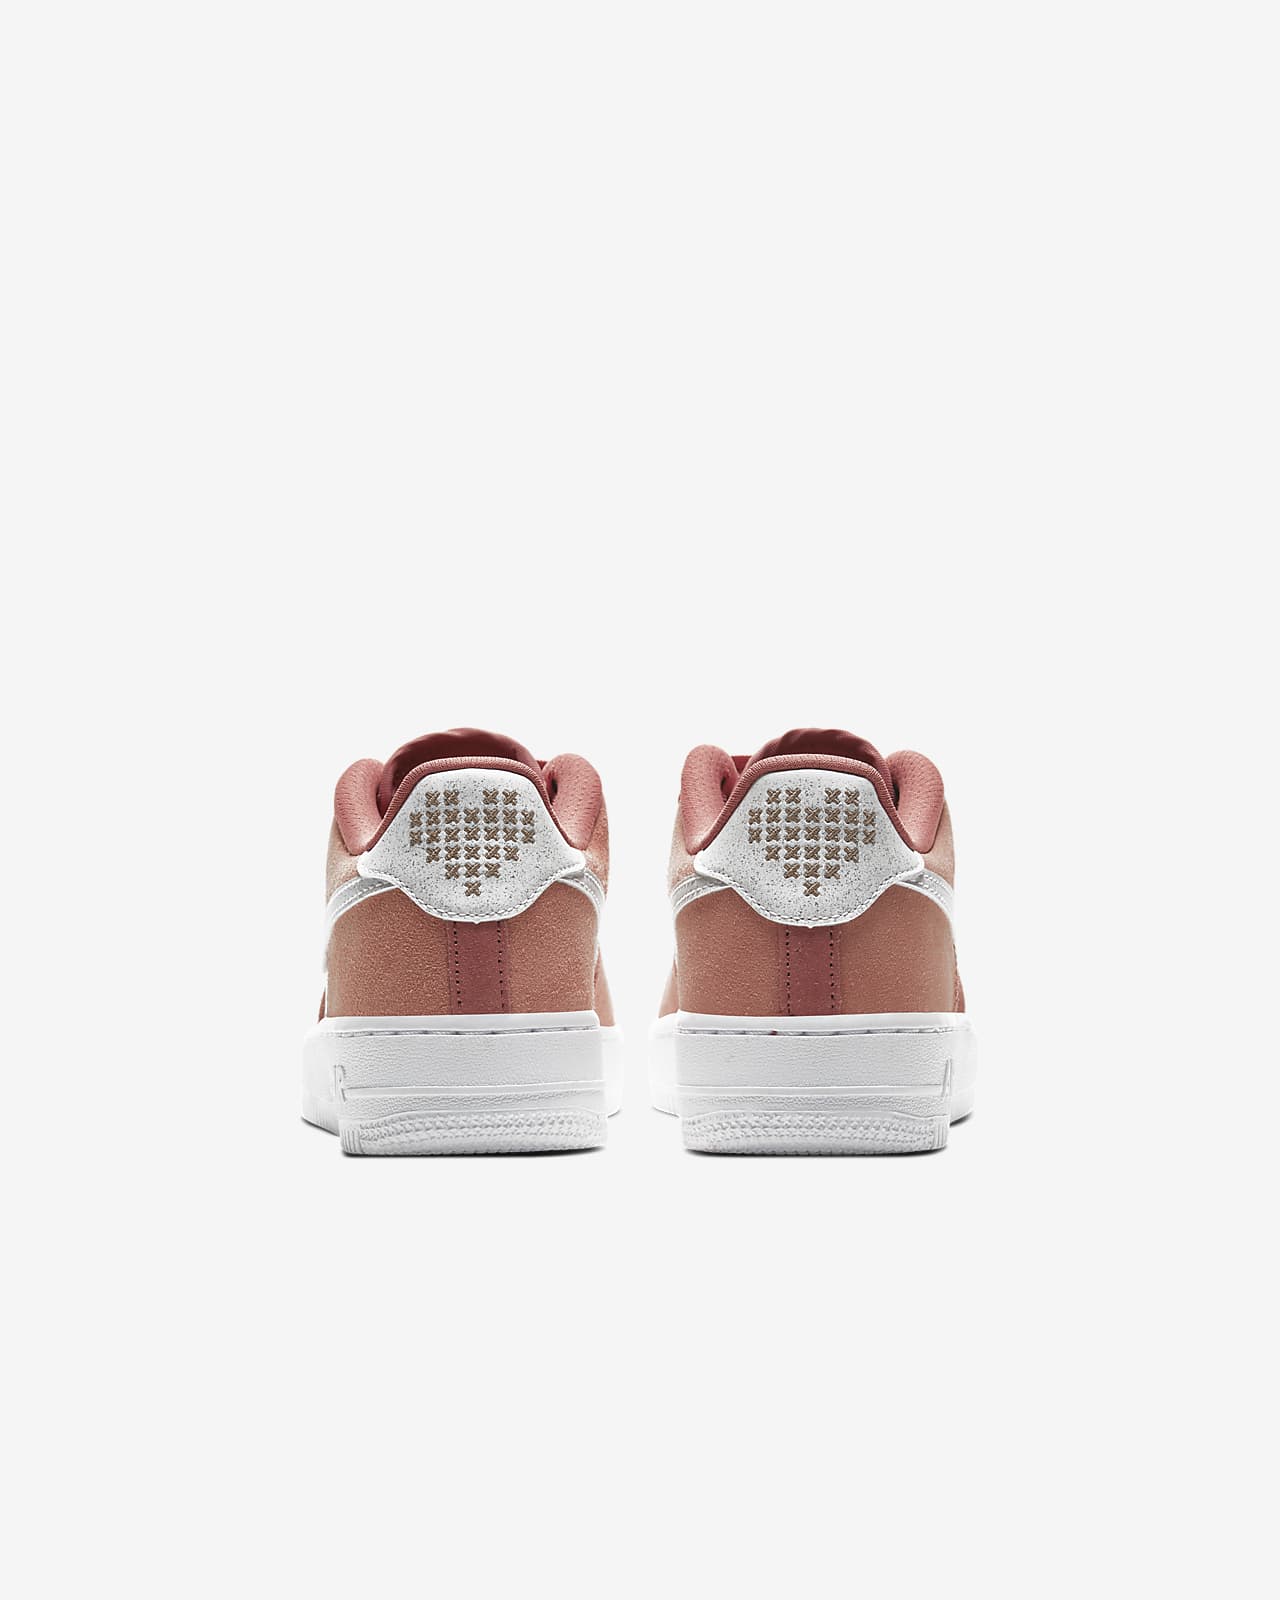 Nike Air Force 1 LV8 Valentine's Day 